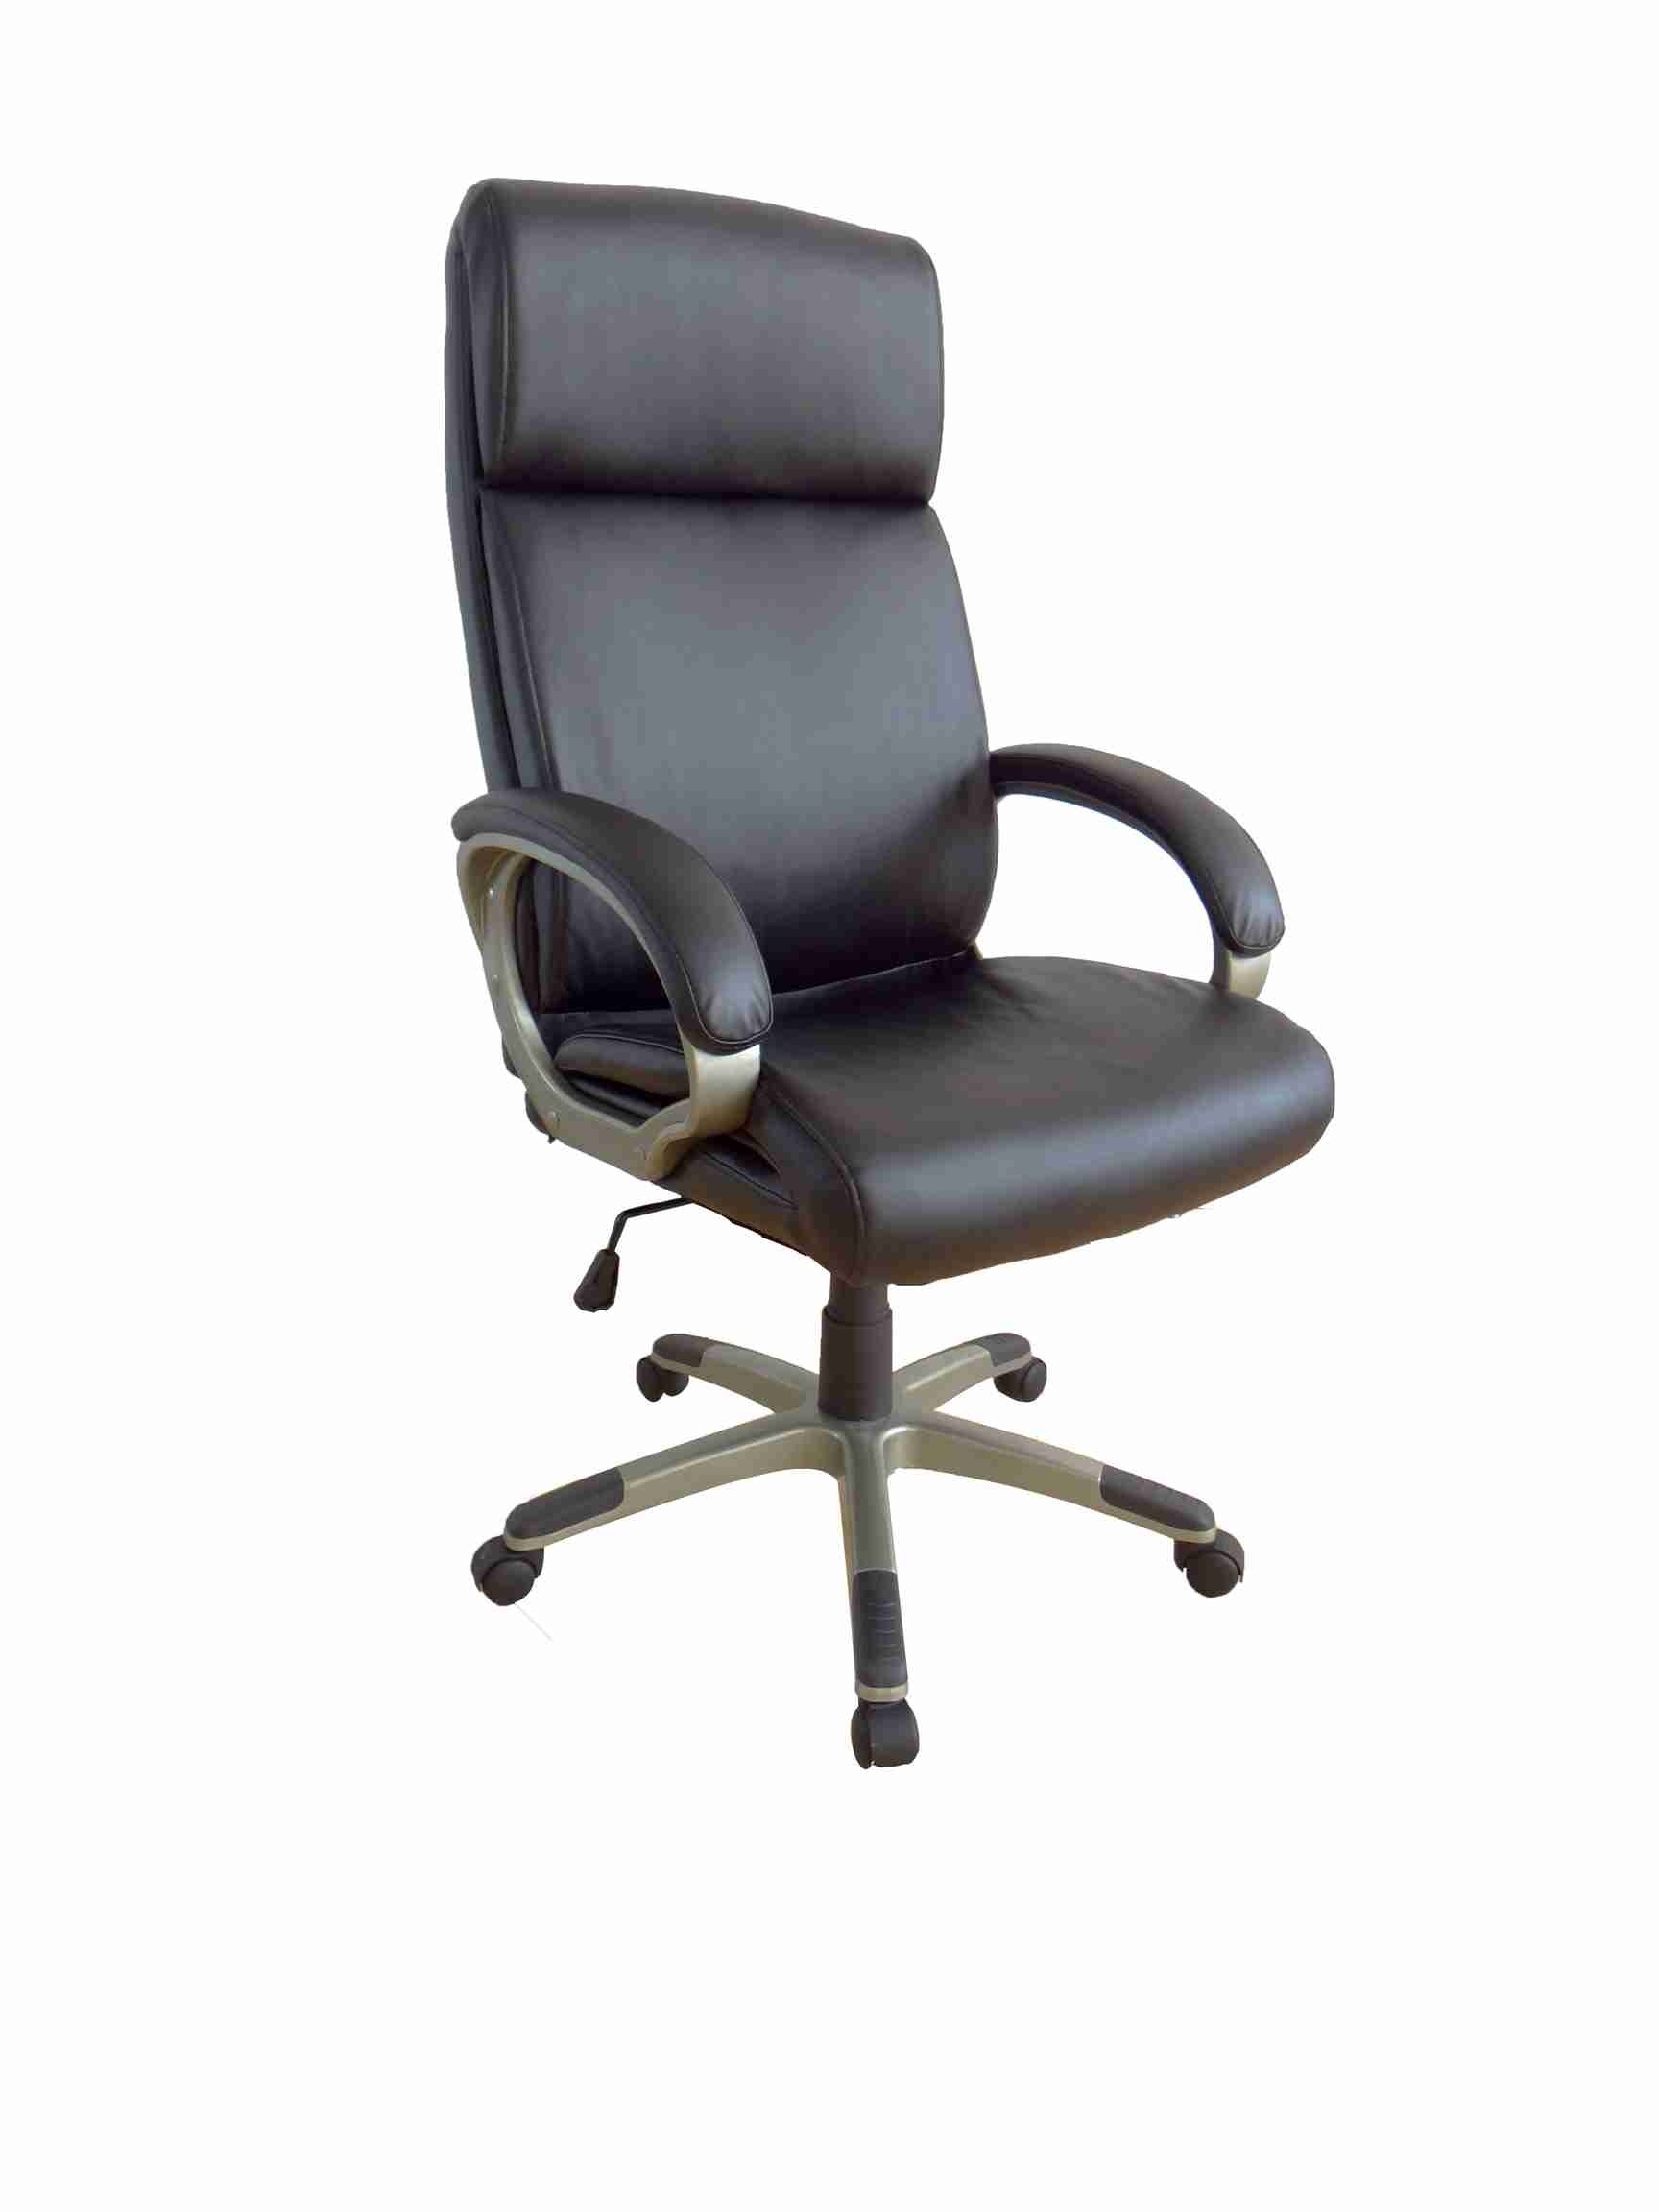 Office, Executive, Leader Chair With Bounded Leather And Adjustable Height-10760